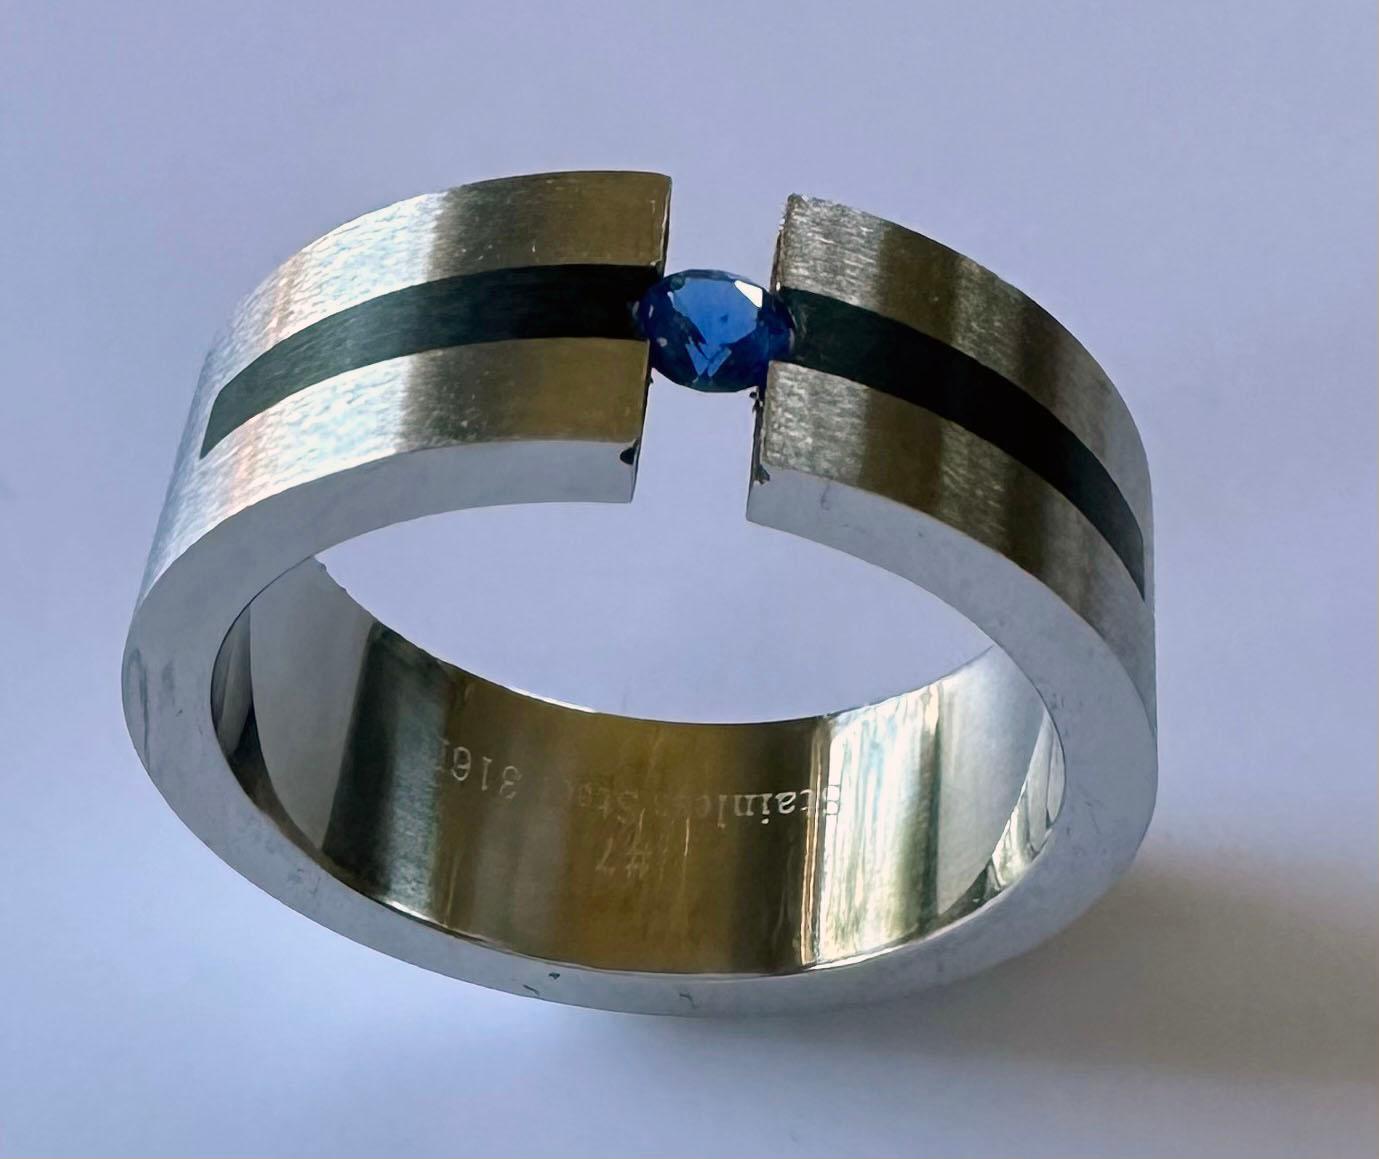 Stainless Steel Tension Ring set with Sapphire In New Condition For Sale In Coupeville, WA